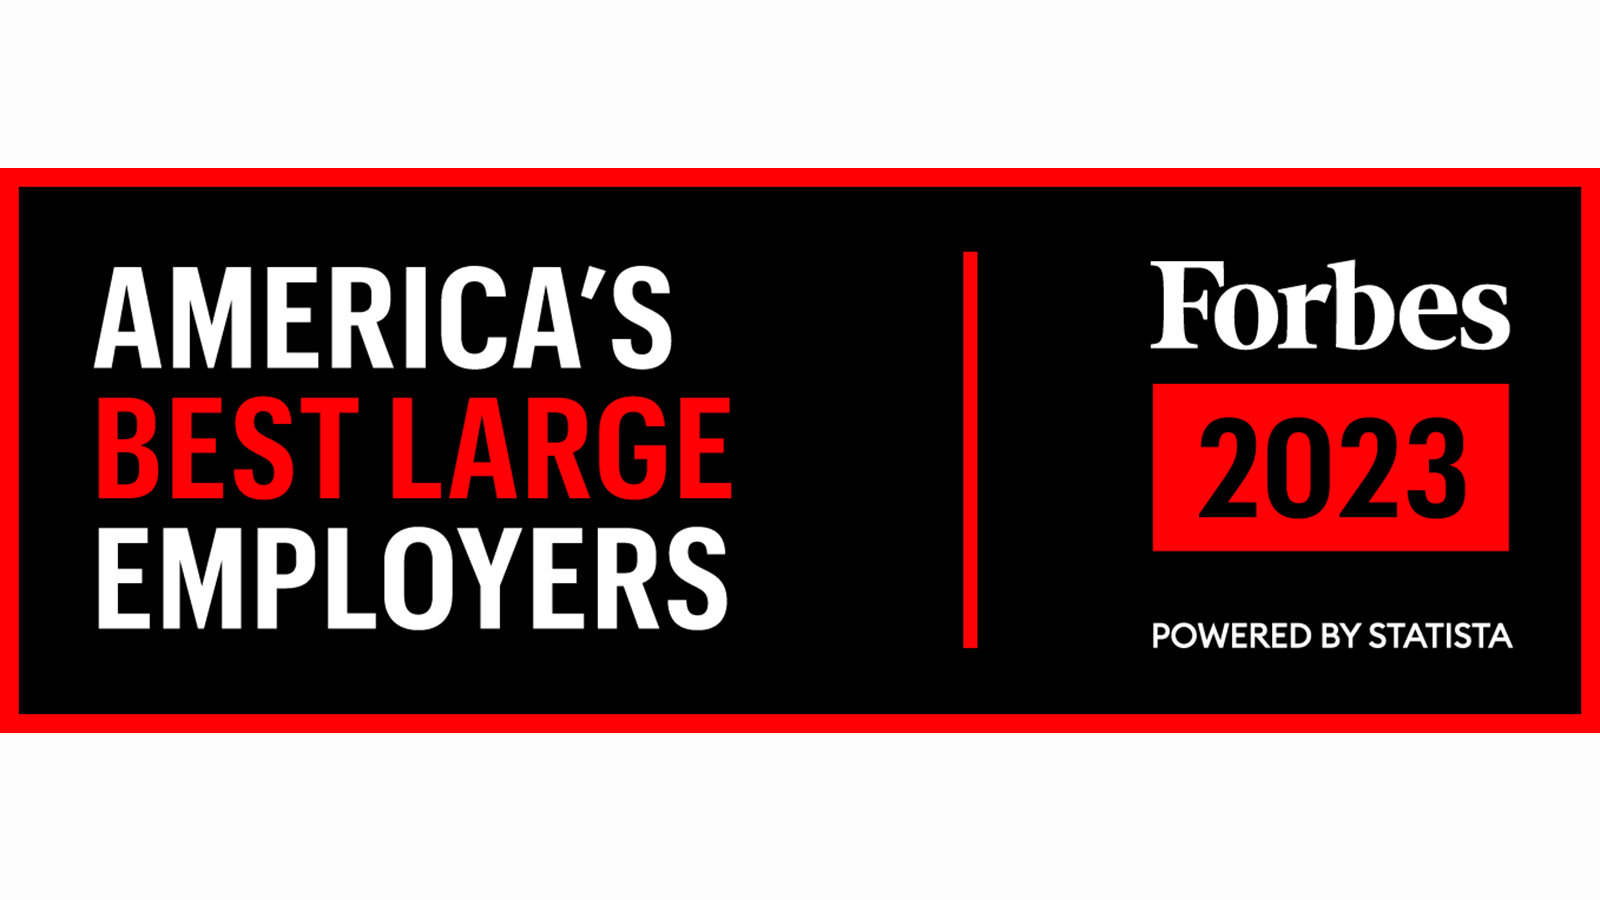 America's Best Large Employers Forbes 2023